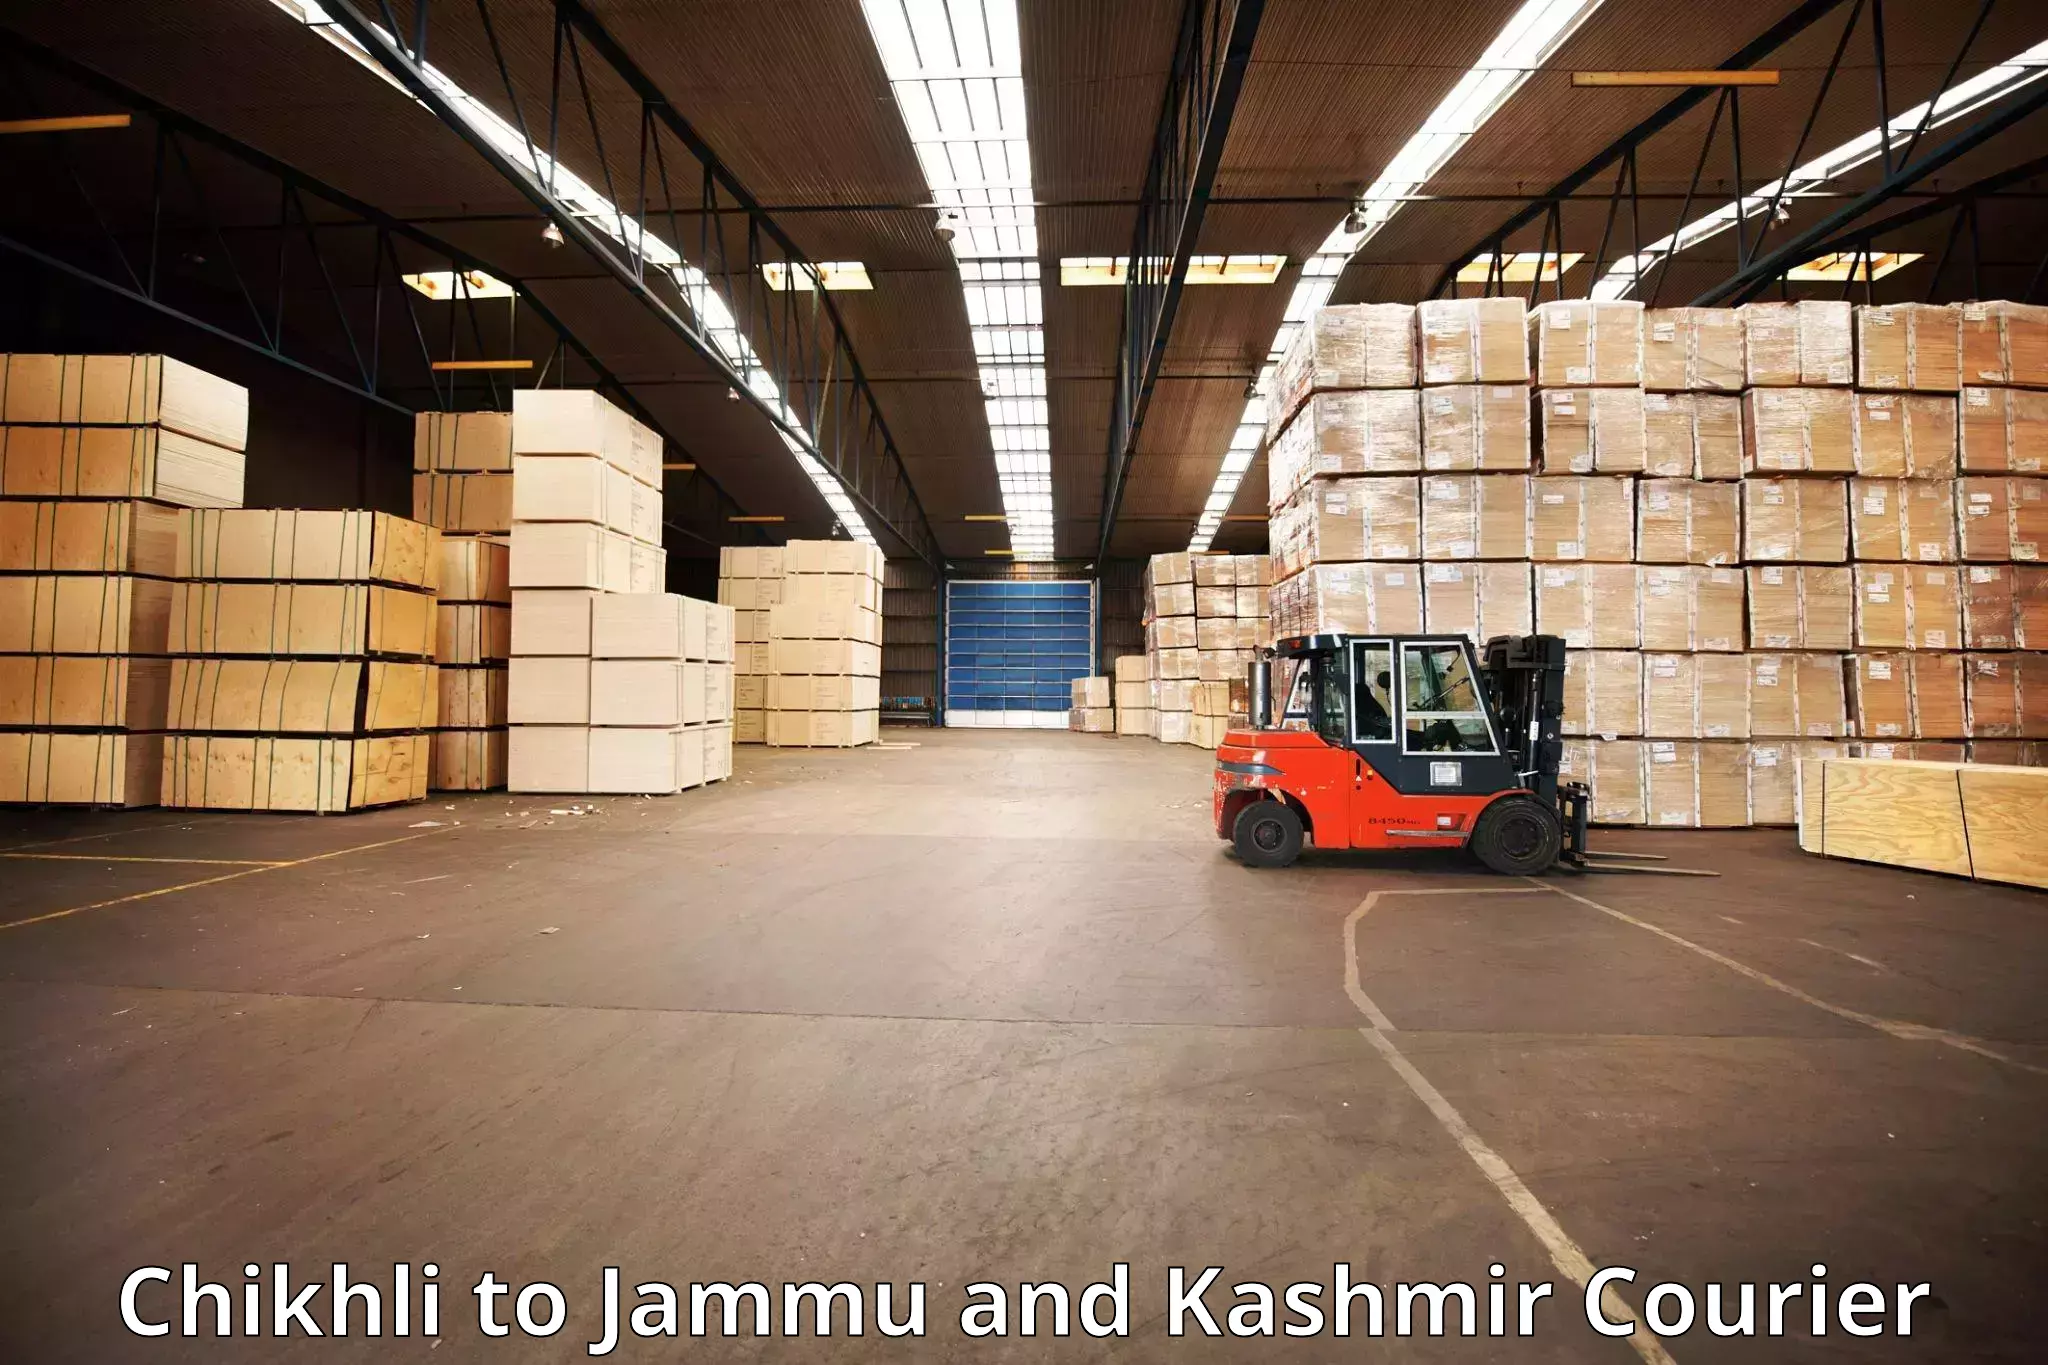 Holiday season luggage delivery in Chikhli to Jammu and Kashmir